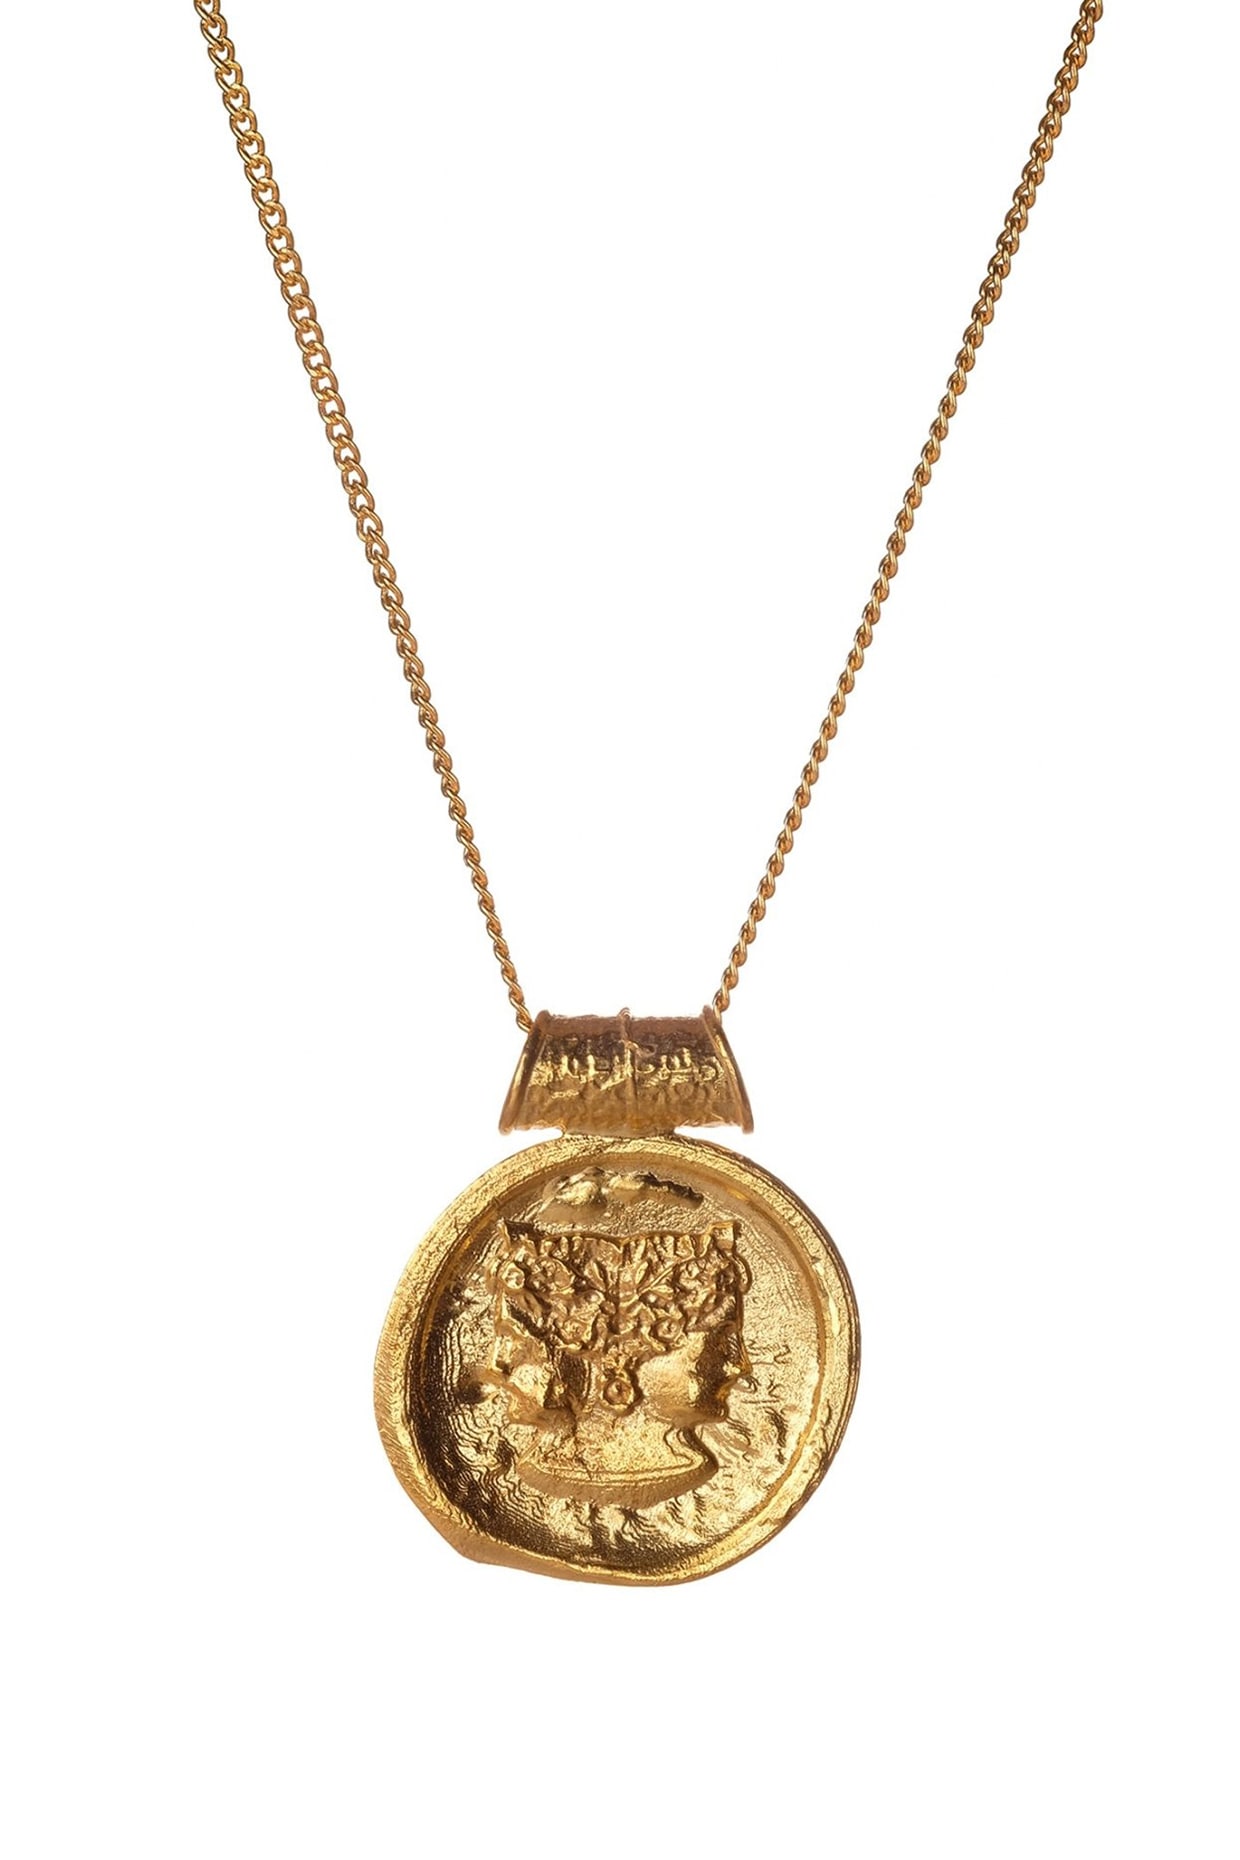 Engraved Gold Plated Gemini Zodiac Necklace By Lily Charmed |  notonthehighstreet.com